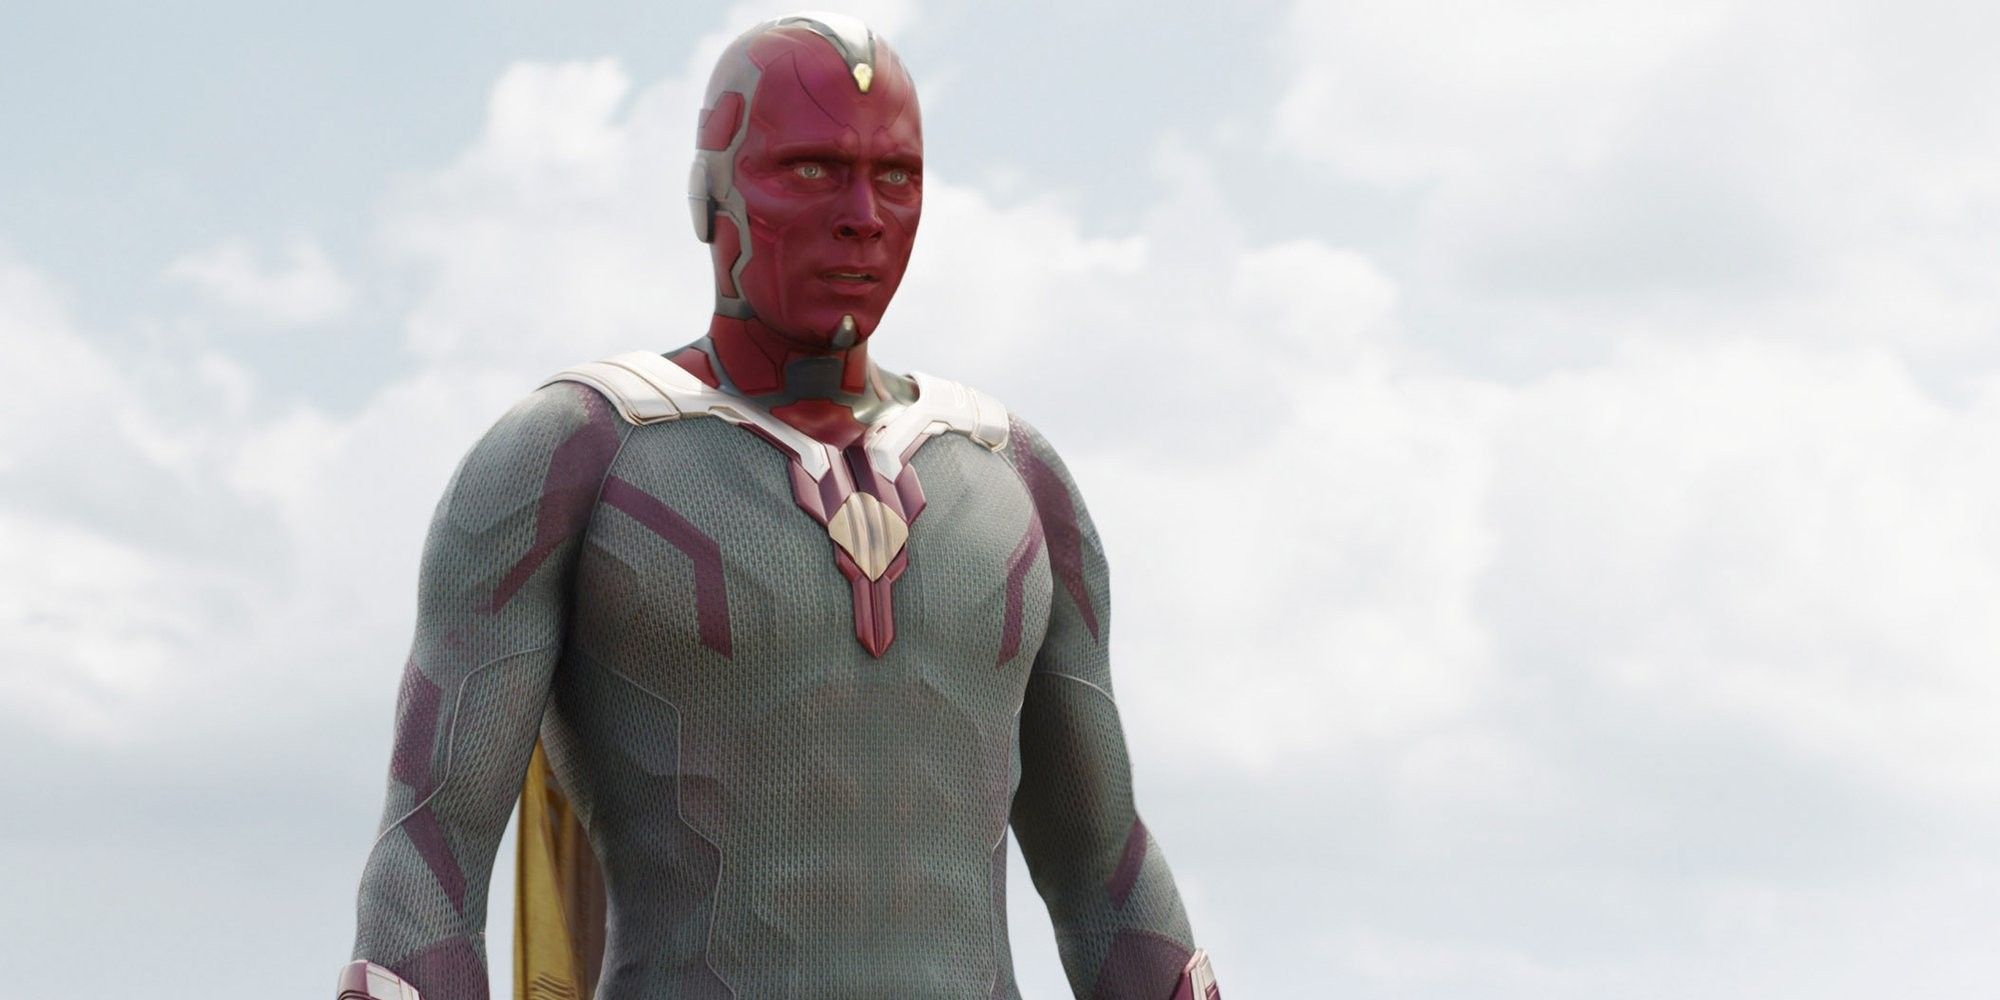 Paul Bettany as Vision in Captain America Civil War floating in air